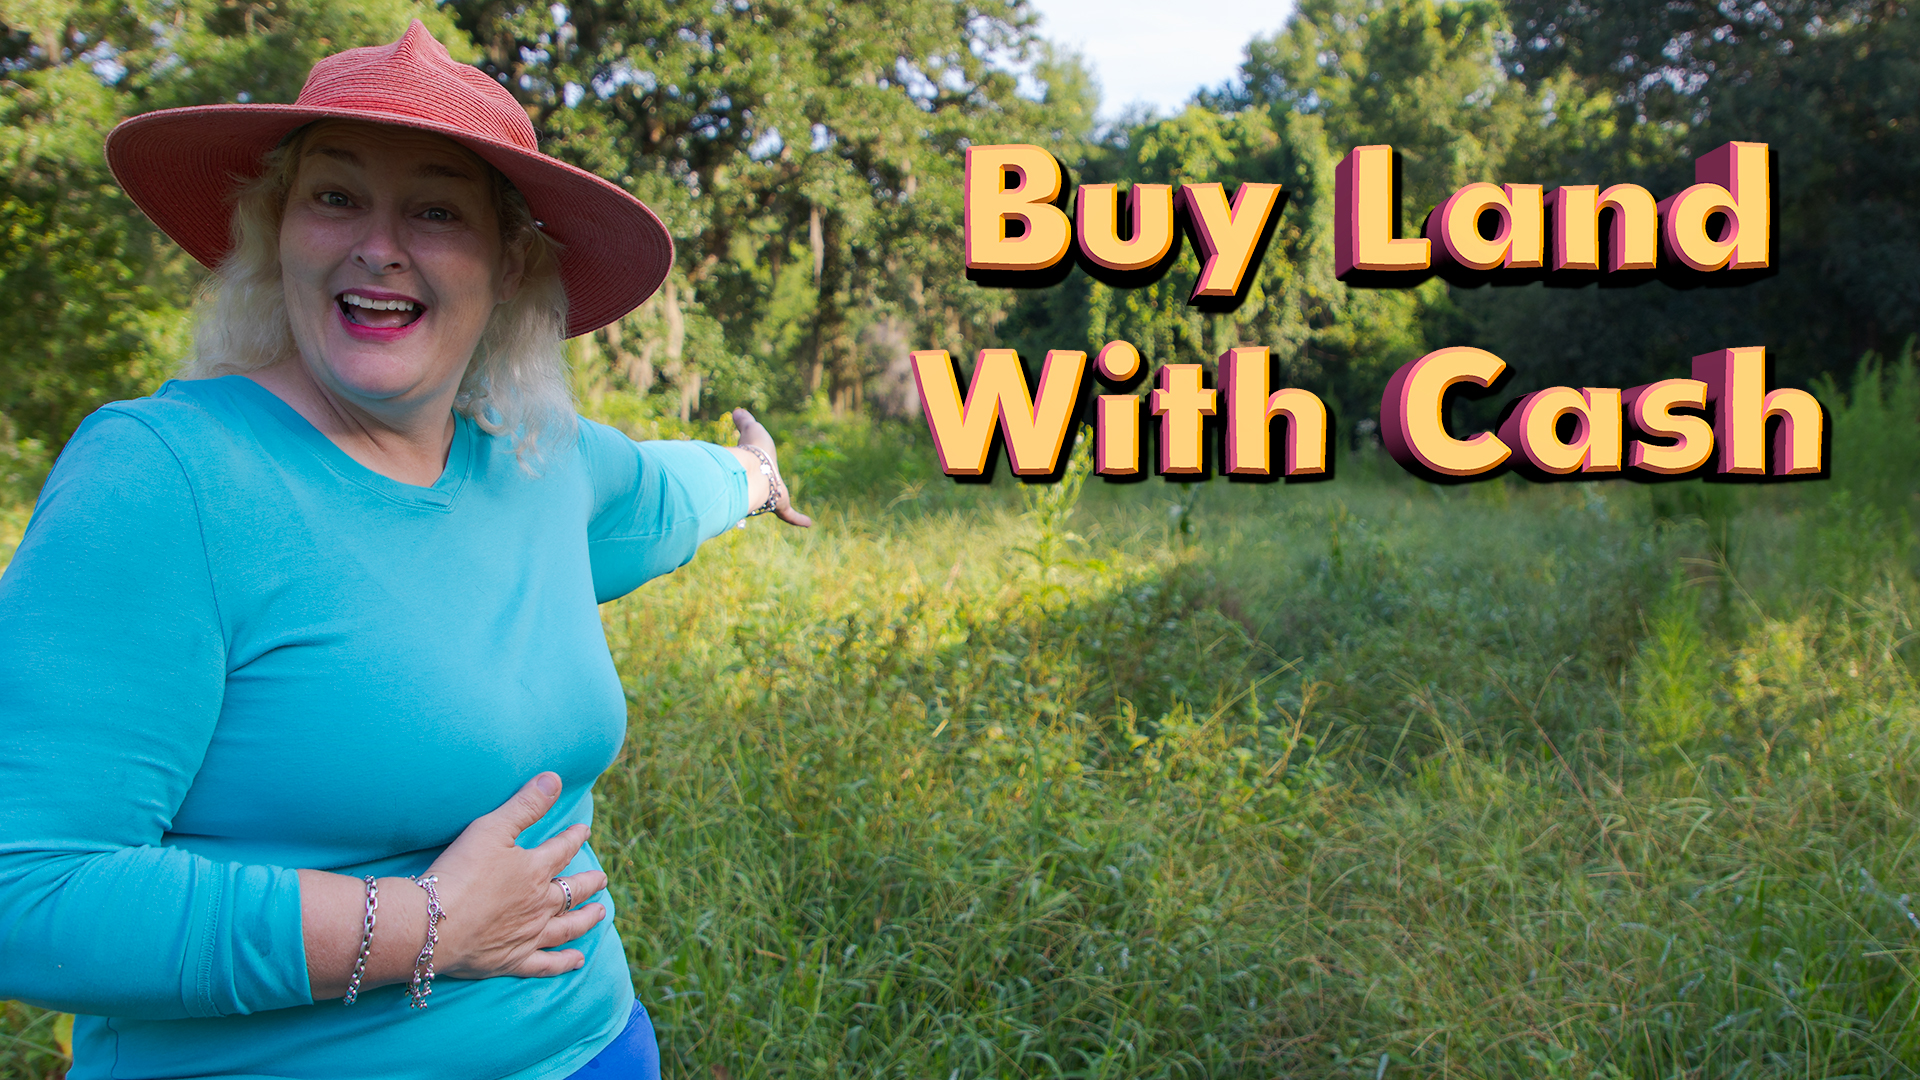 Buying Land With Cash: How to Do It Step-by-Step